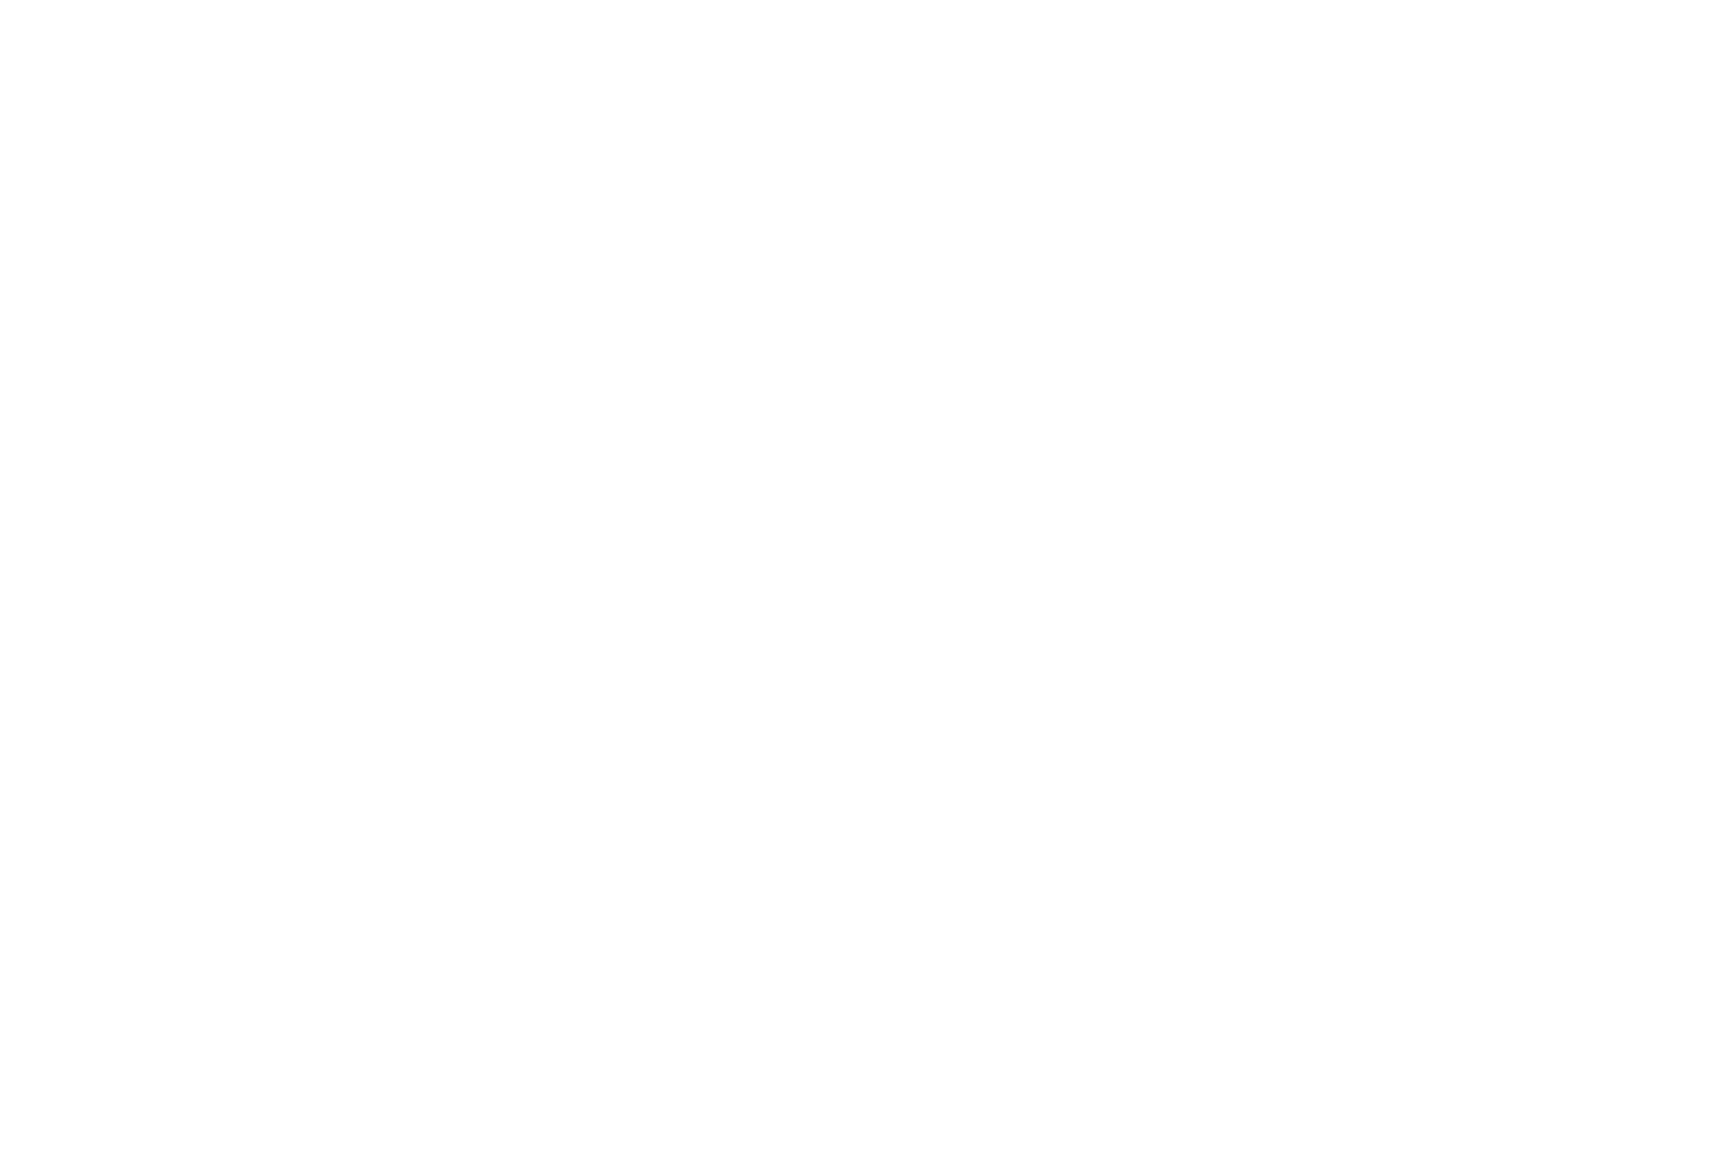 NOMINATED - BEST FIRST TIME DIRECTOR MALE - Indie Short Fest - 2020.png